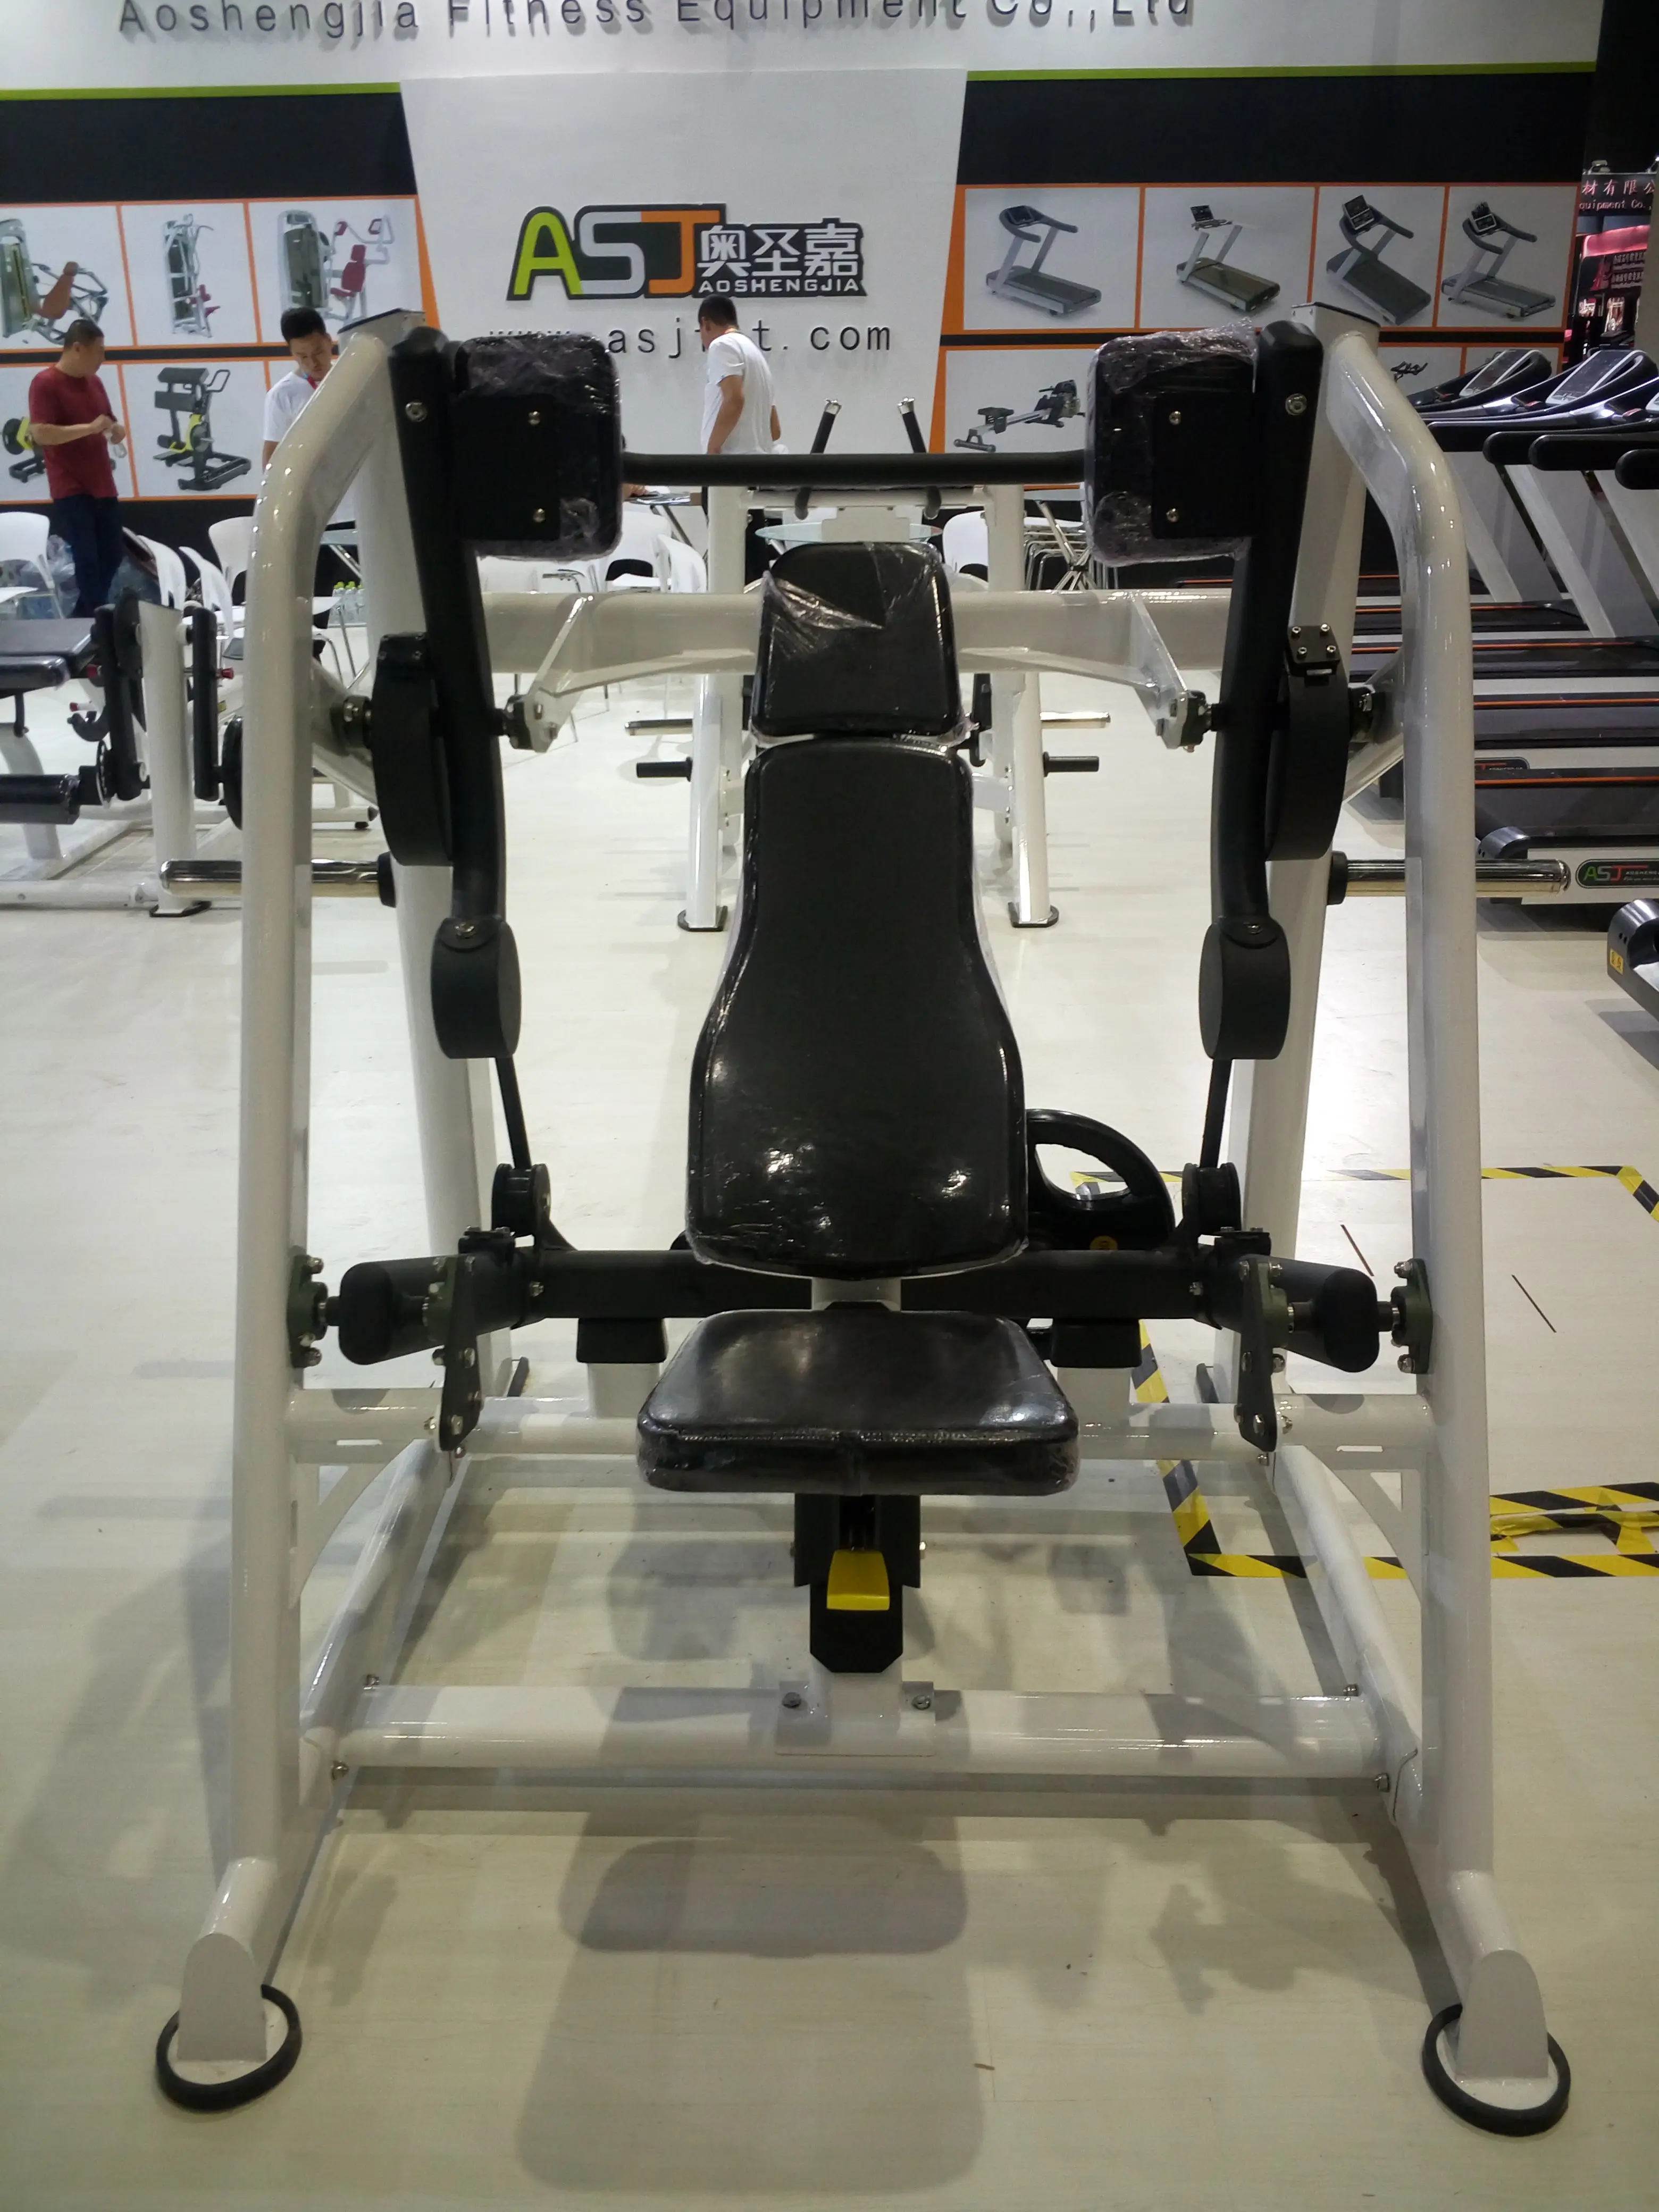 Ideas Gym equipment auction sydney for Workout Today